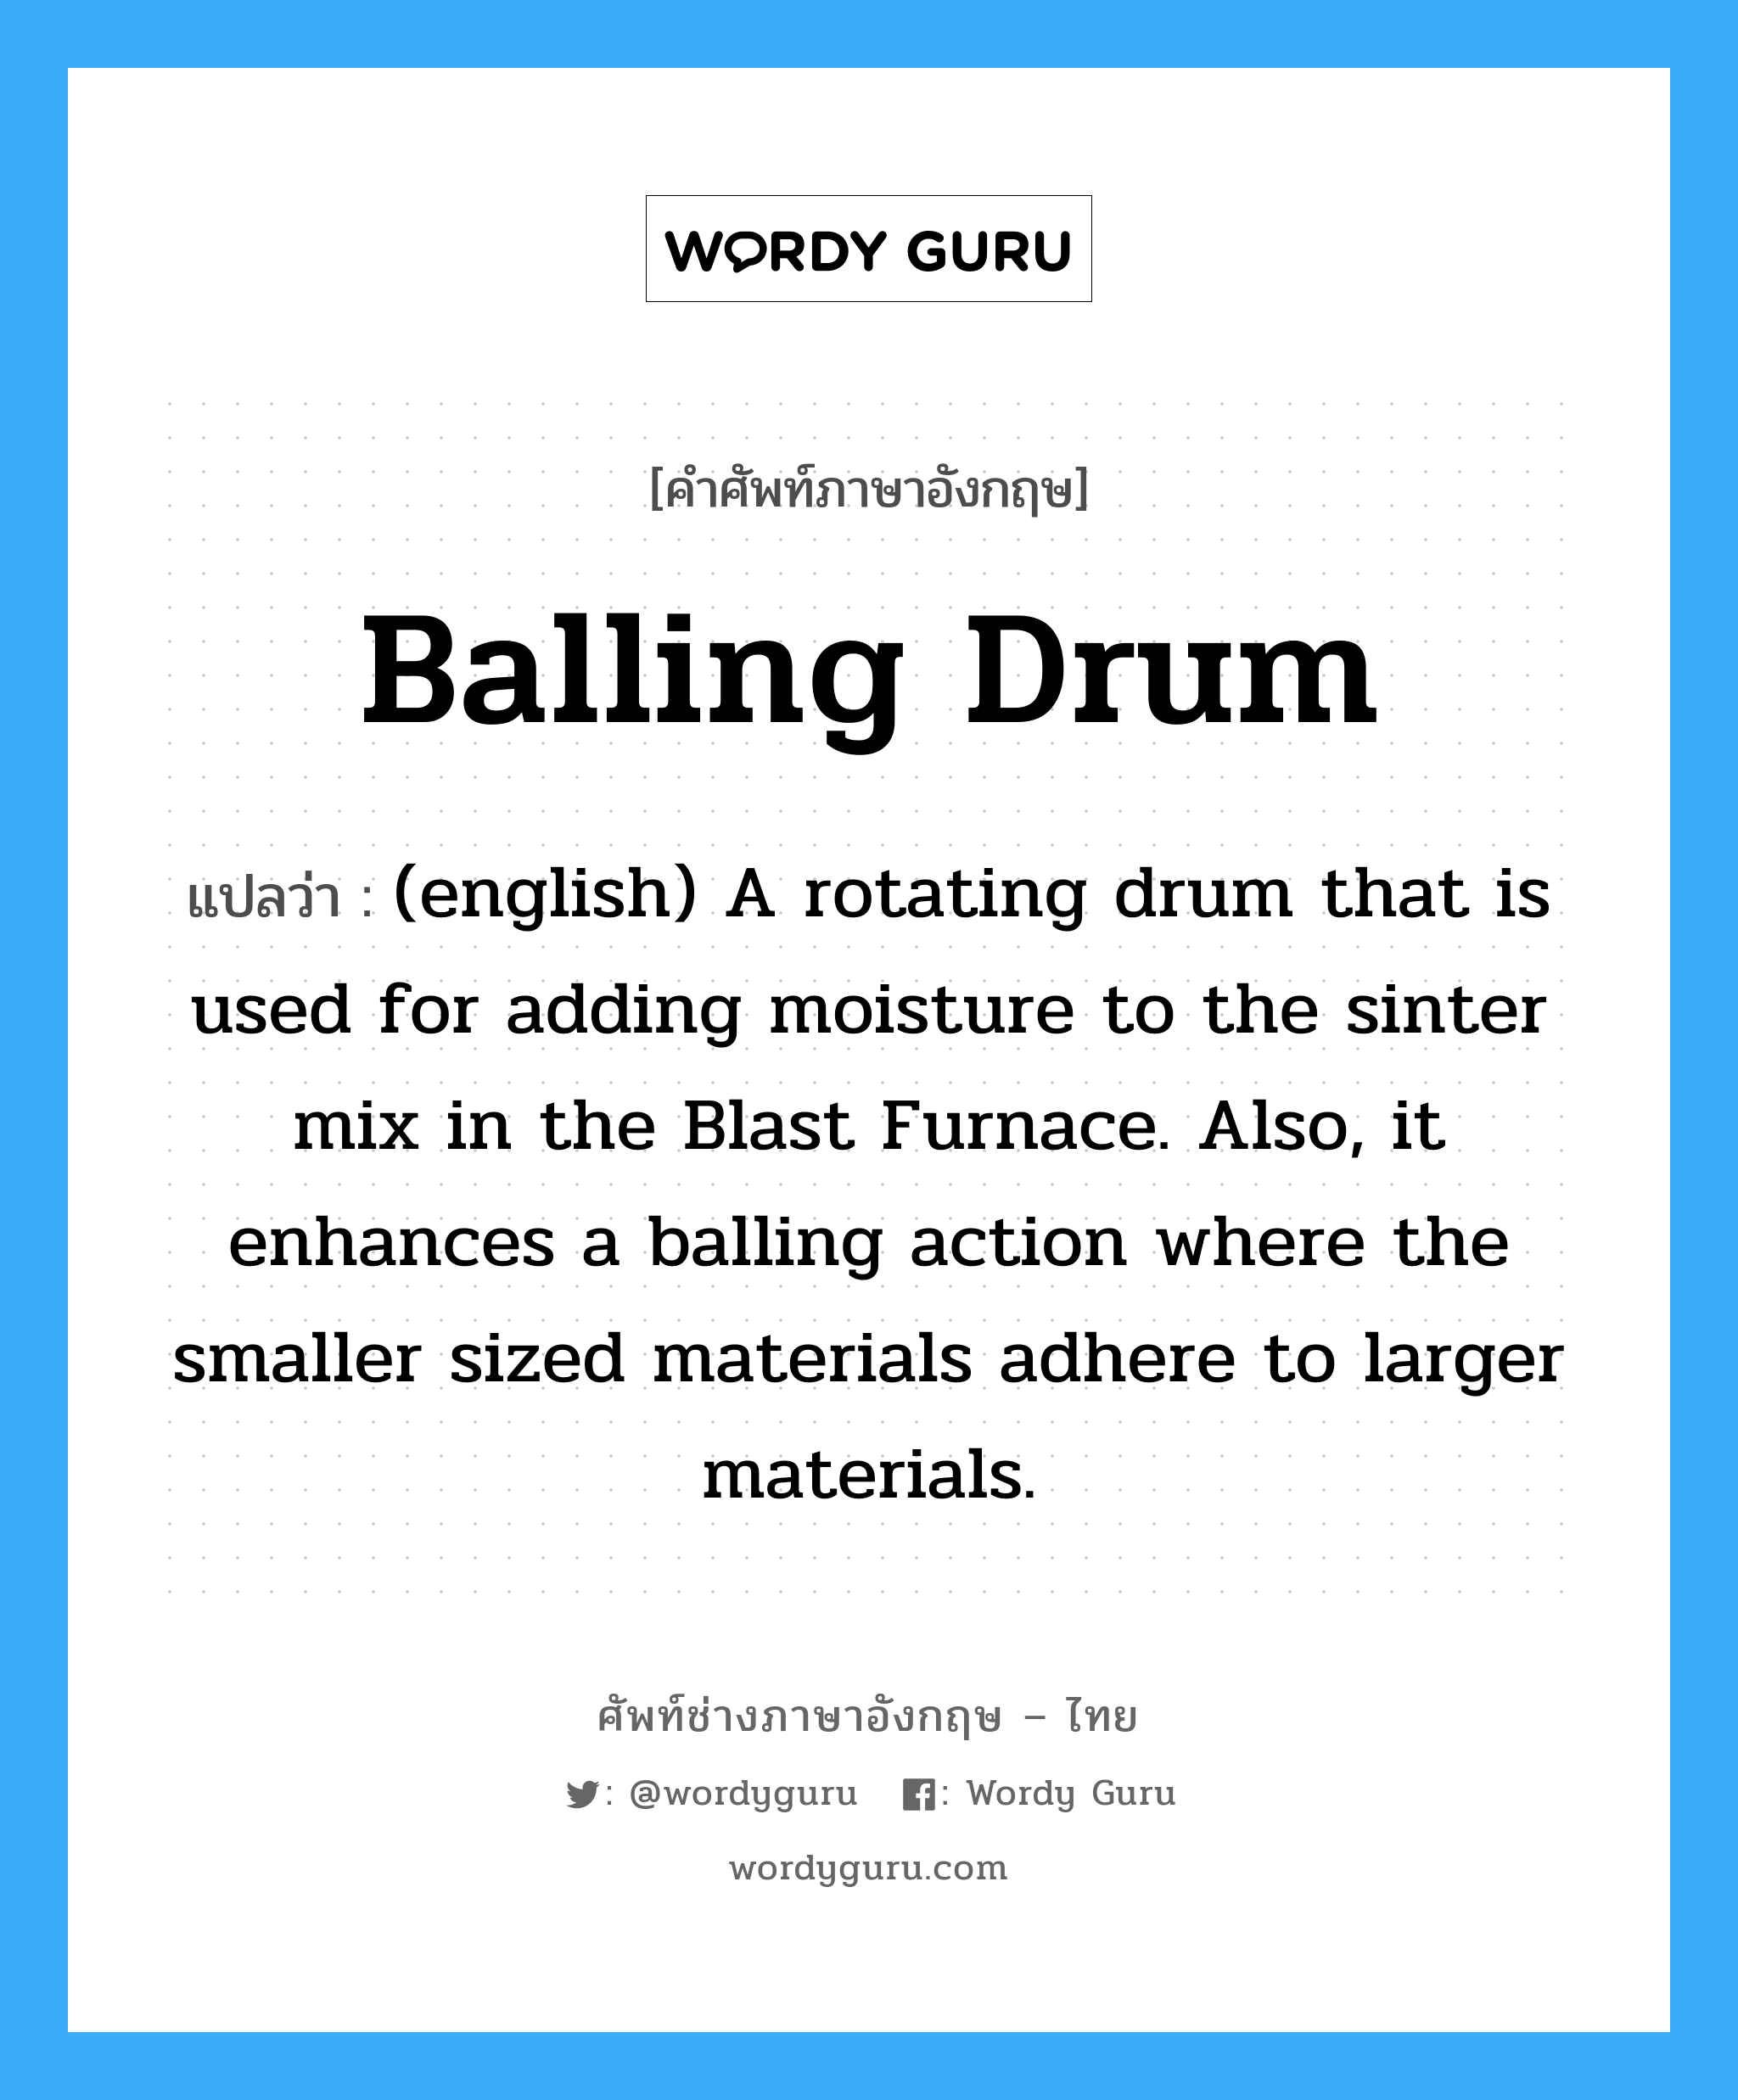 Balling Drum แปลว่า?, คำศัพท์ช่างภาษาอังกฤษ - ไทย Balling Drum คำศัพท์ภาษาอังกฤษ Balling Drum แปลว่า (english) A rotating drum that is used for adding moisture to the sinter mix in the Blast Furnace. Also, it enhances a balling action where the smaller sized materials adhere to larger materials.